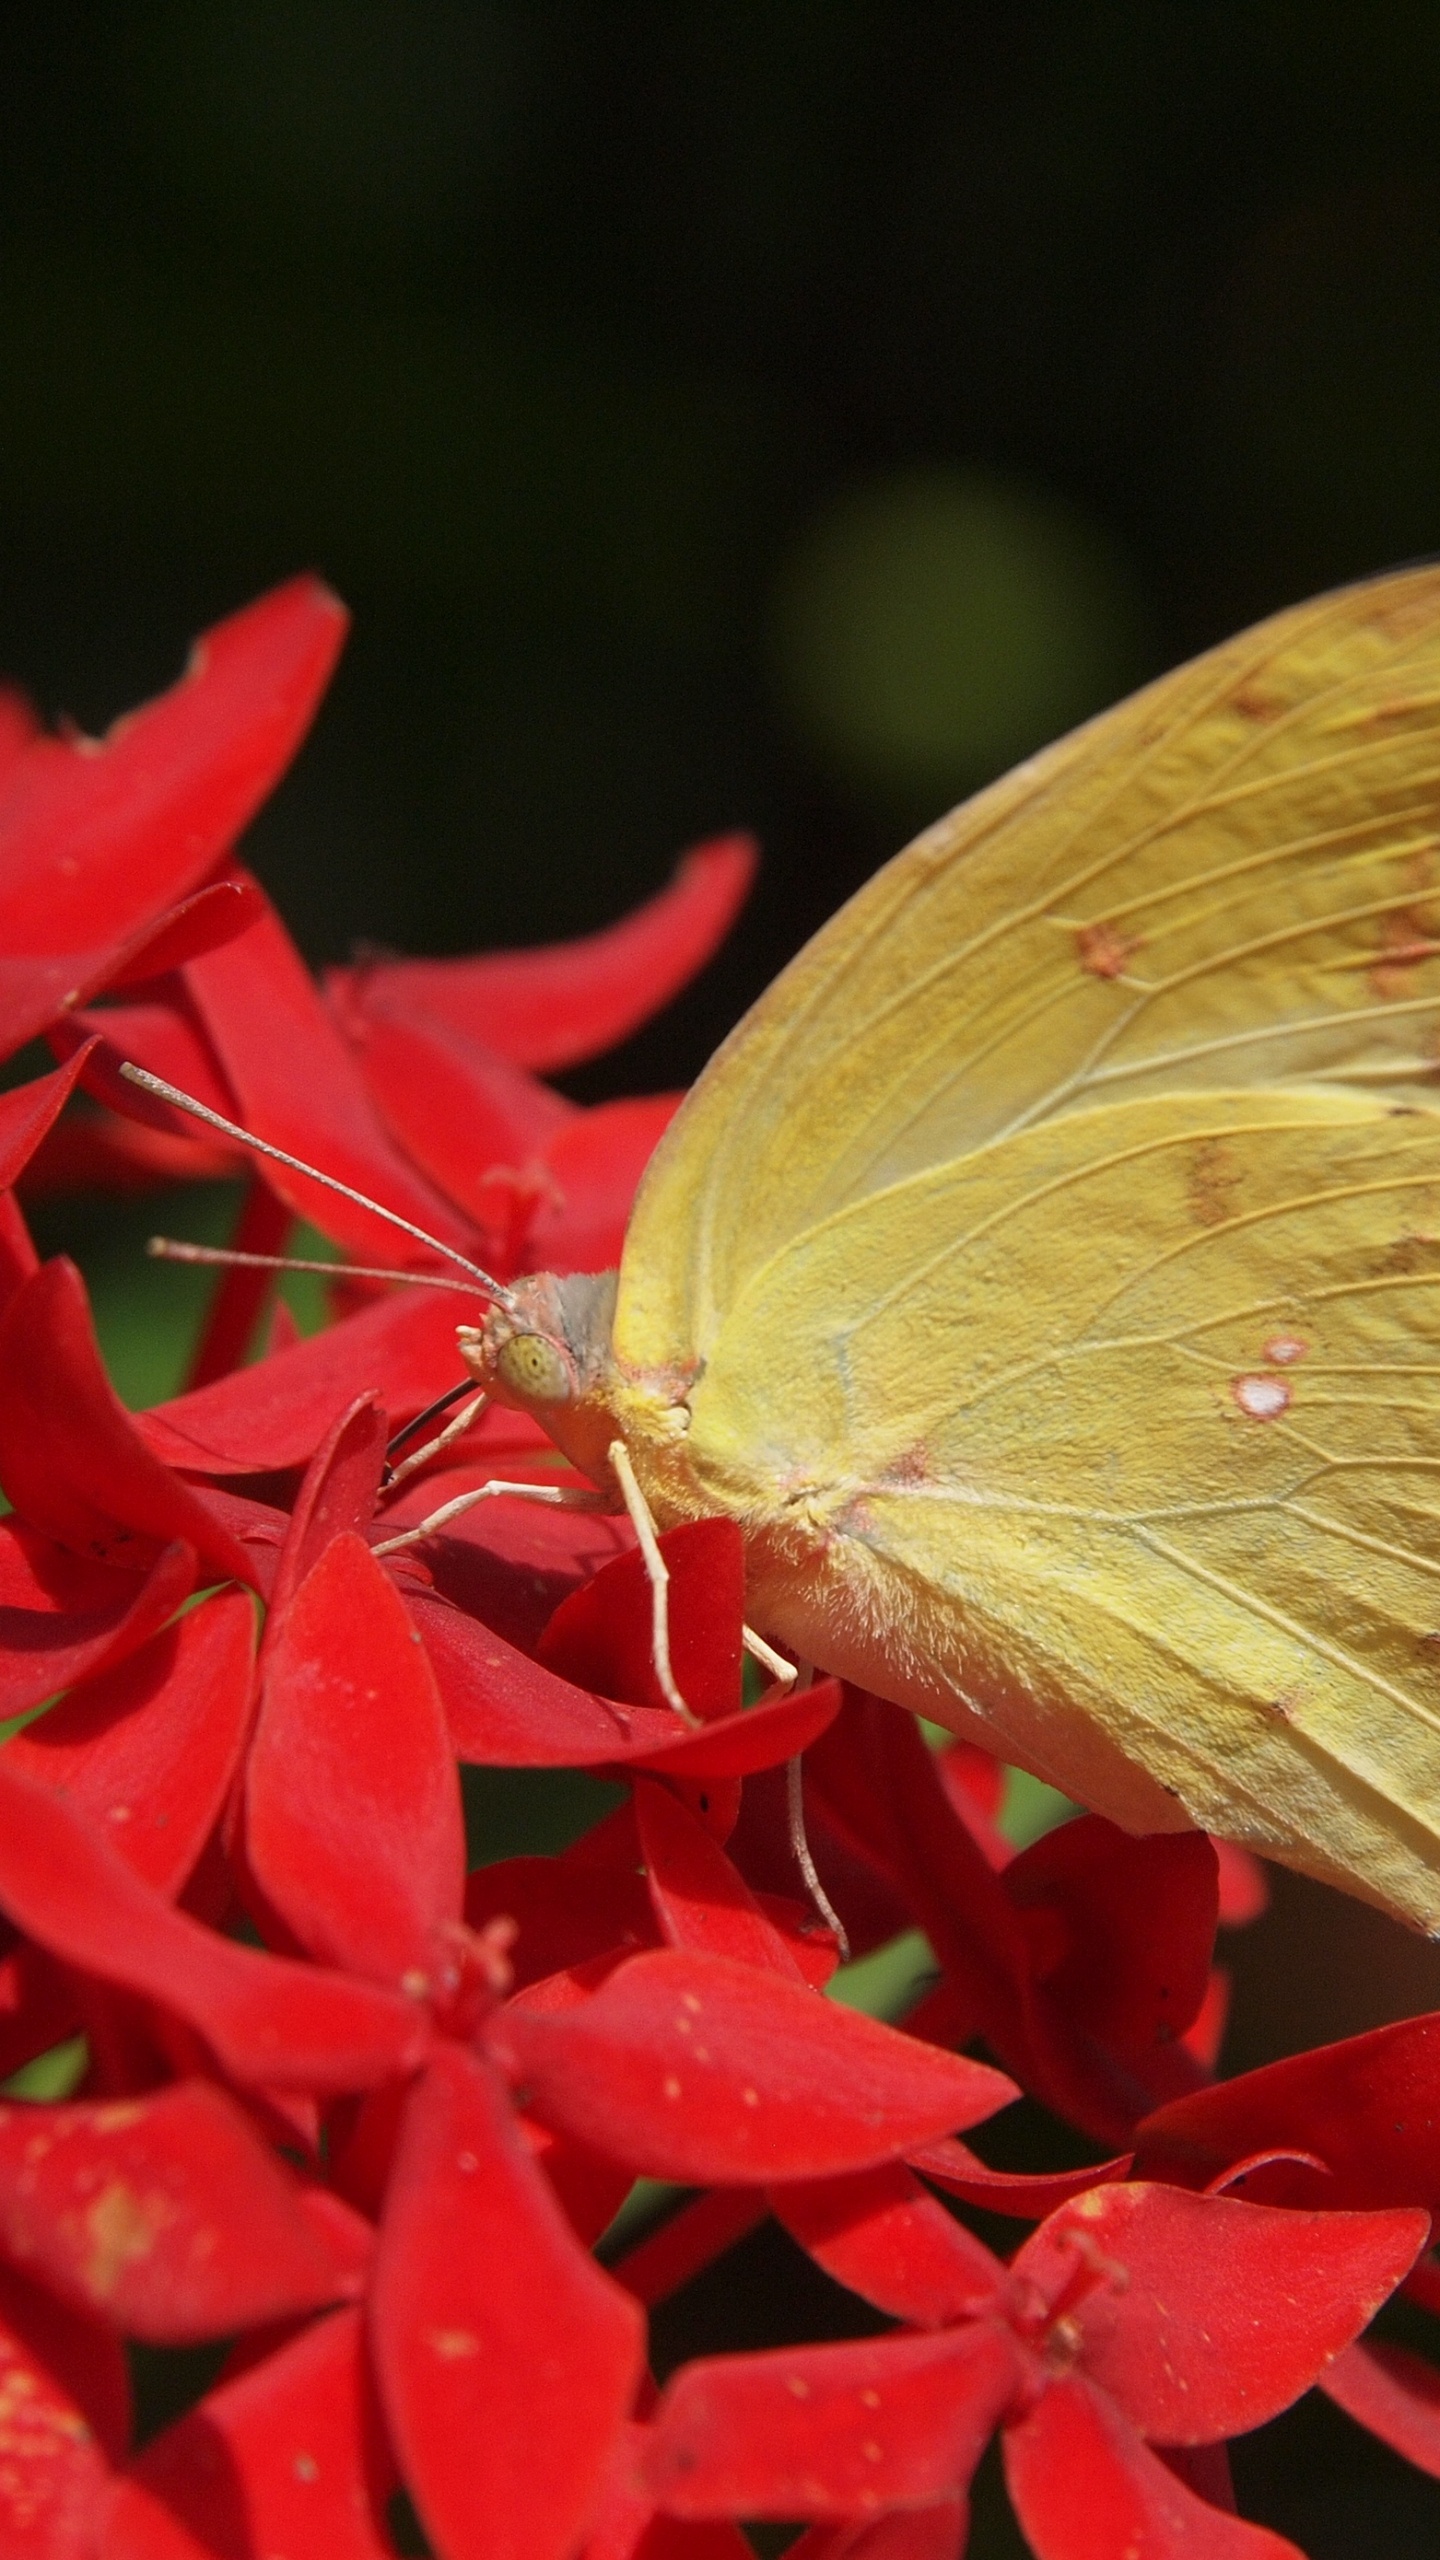 Yellow Butterfly Perched on Red Flower in Close up Photography During Daytime. Wallpaper in 1440x2560 Resolution